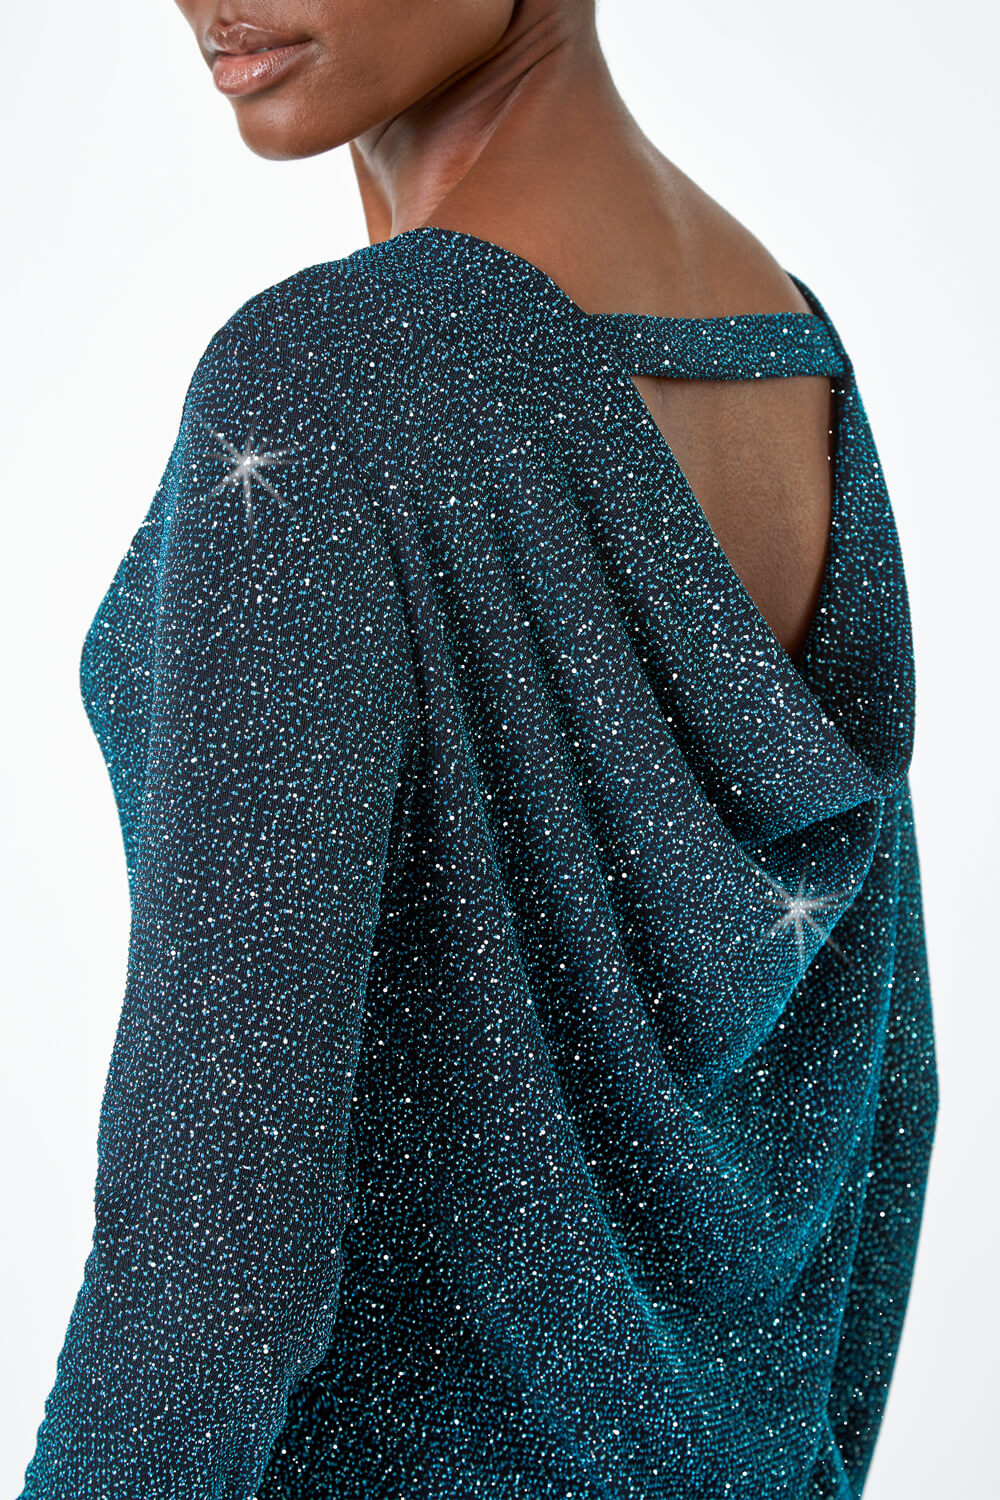 Teal Sparkle Cowl Back Detail Stretch Top, Image 5 of 5